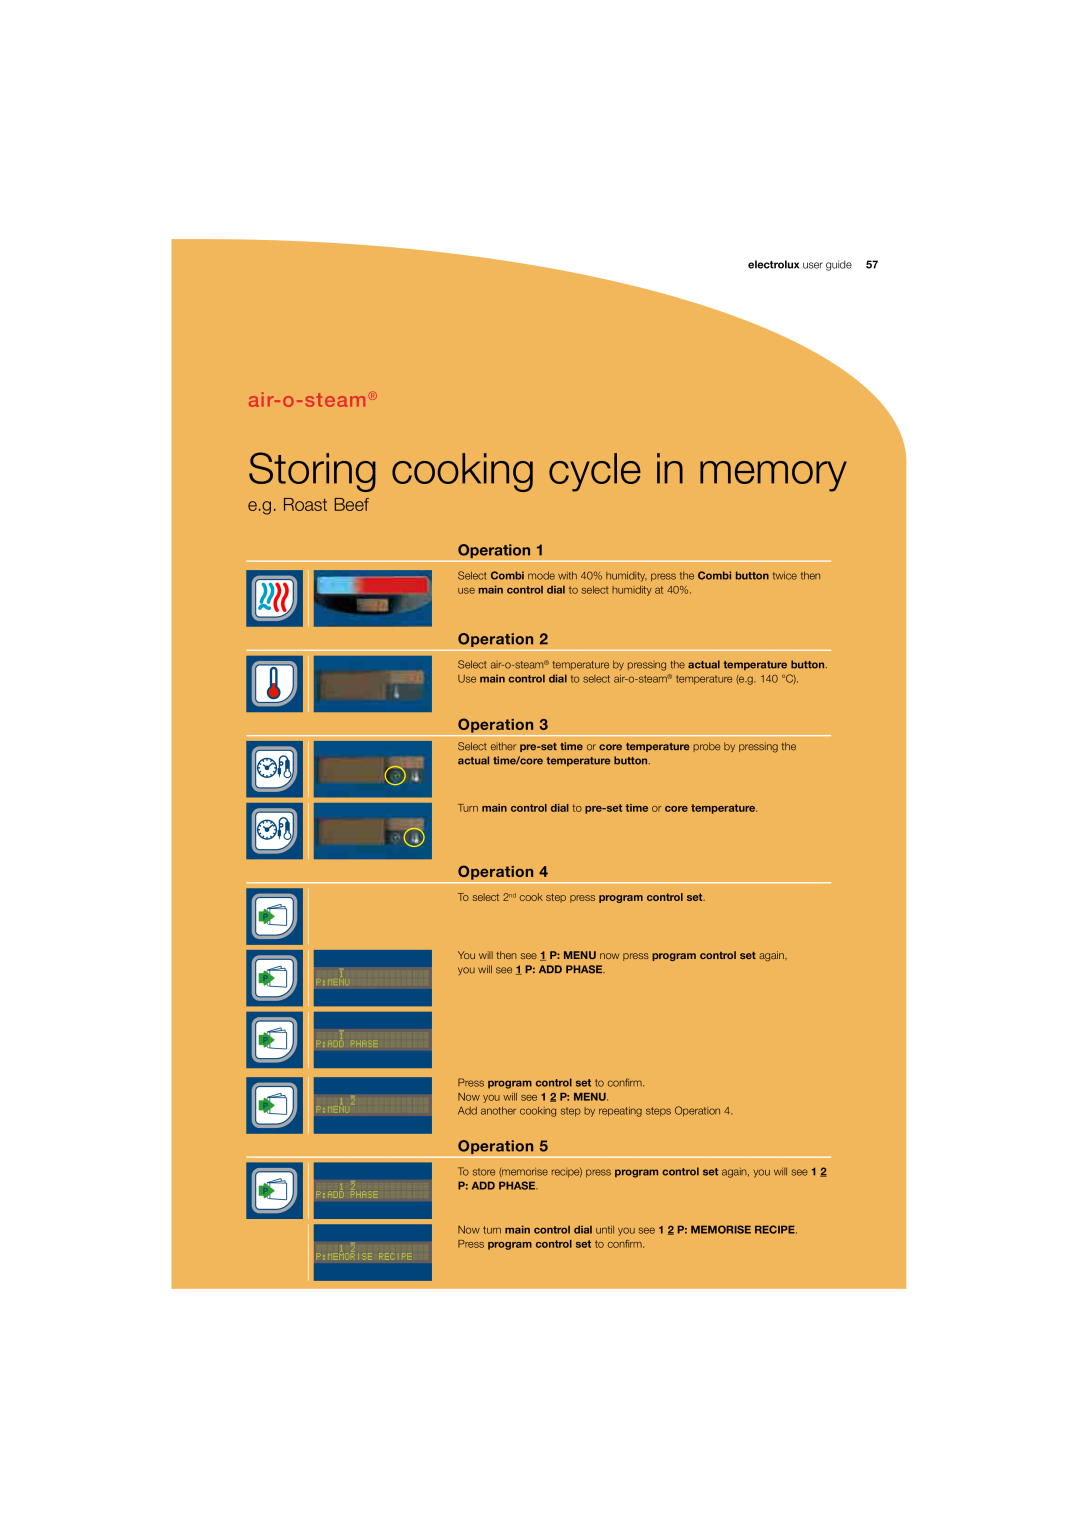 Electrolux 180 manual Storing cooking cycle in memory, air-o-steam, e.g. Roast Beef, Operation, electrolux user guide 